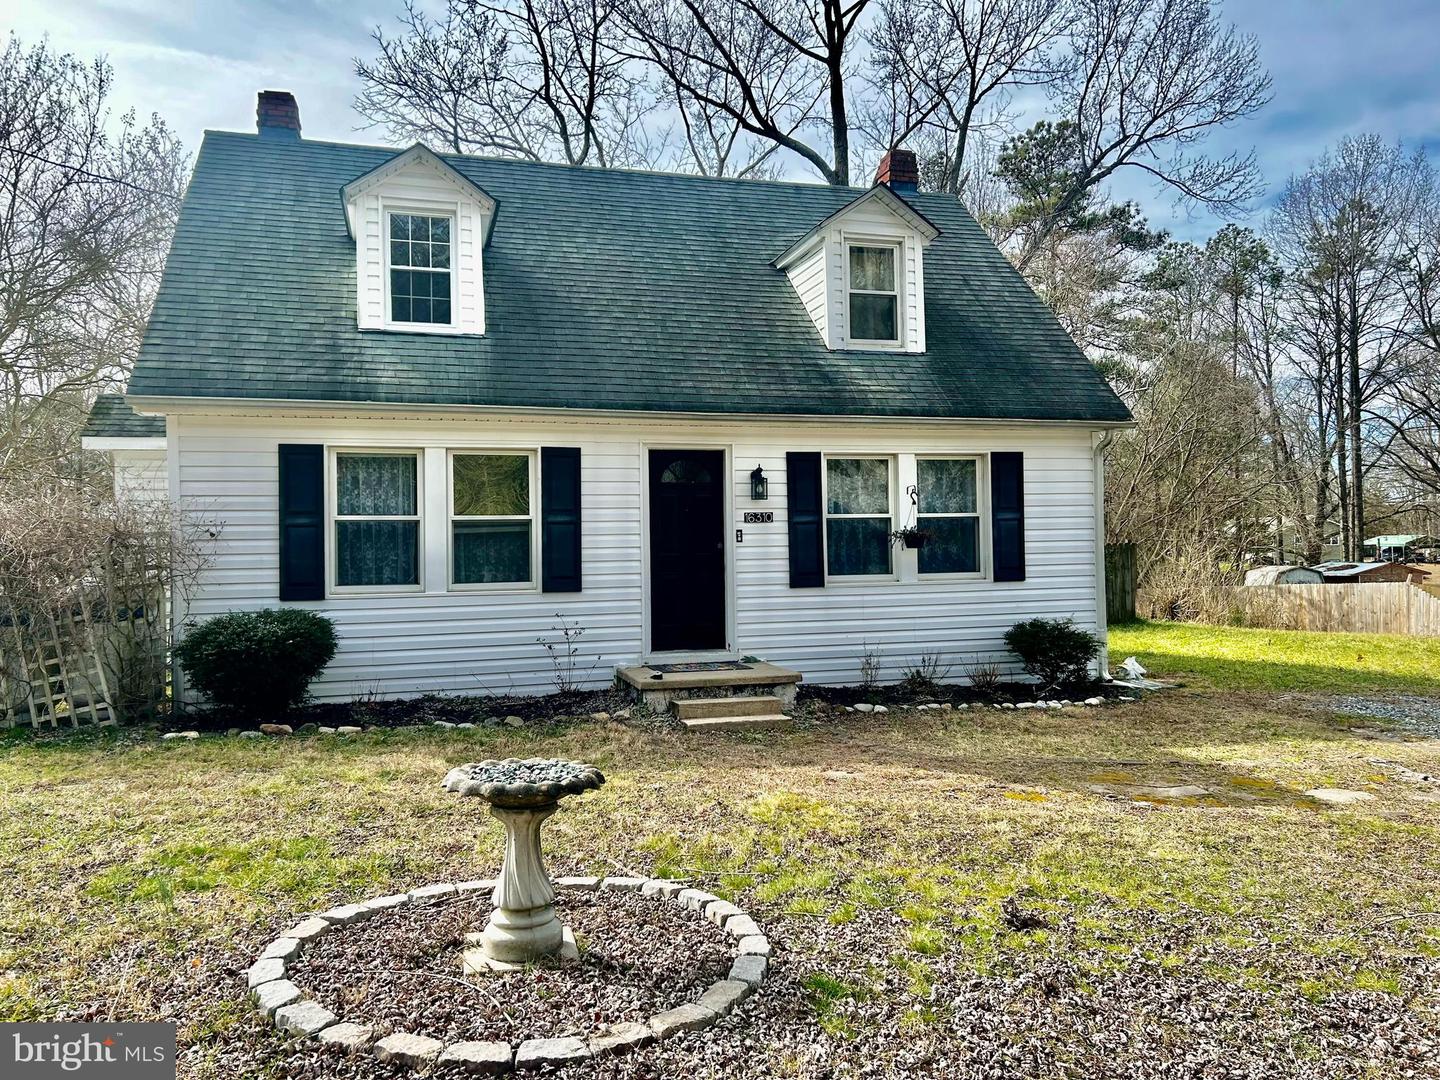 16310 EDWARDS RD, BOWLING GREEN, Virginia 22427, 3 Bedrooms Bedrooms, ,1 BathroomBathrooms,Residential,For sale,16310 EDWARDS RD,VACV2005770 MLS # VACV2005770